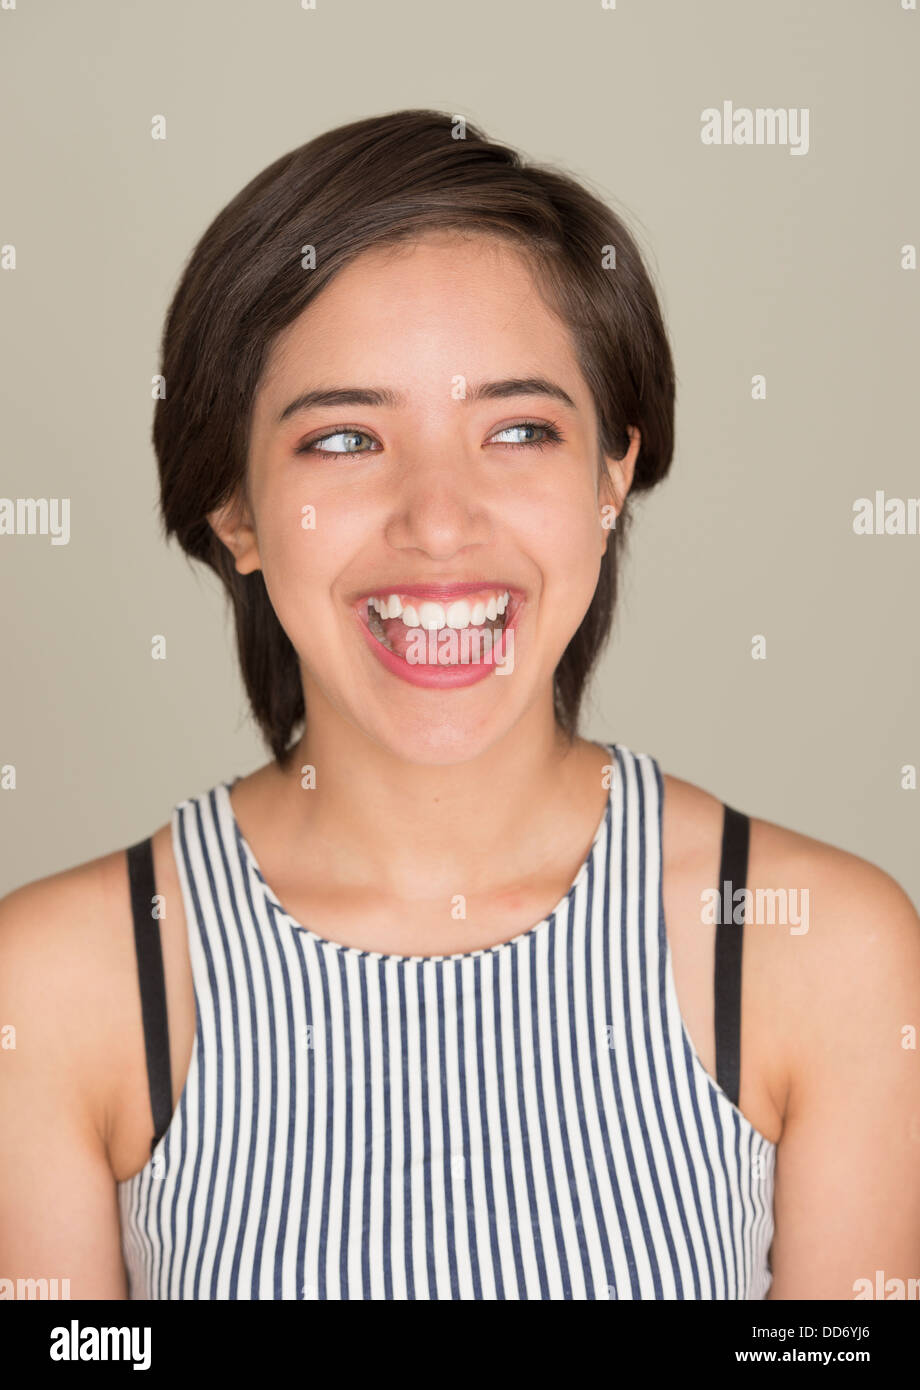 Happy and carefree young woman laughing and looking away Stock Photo